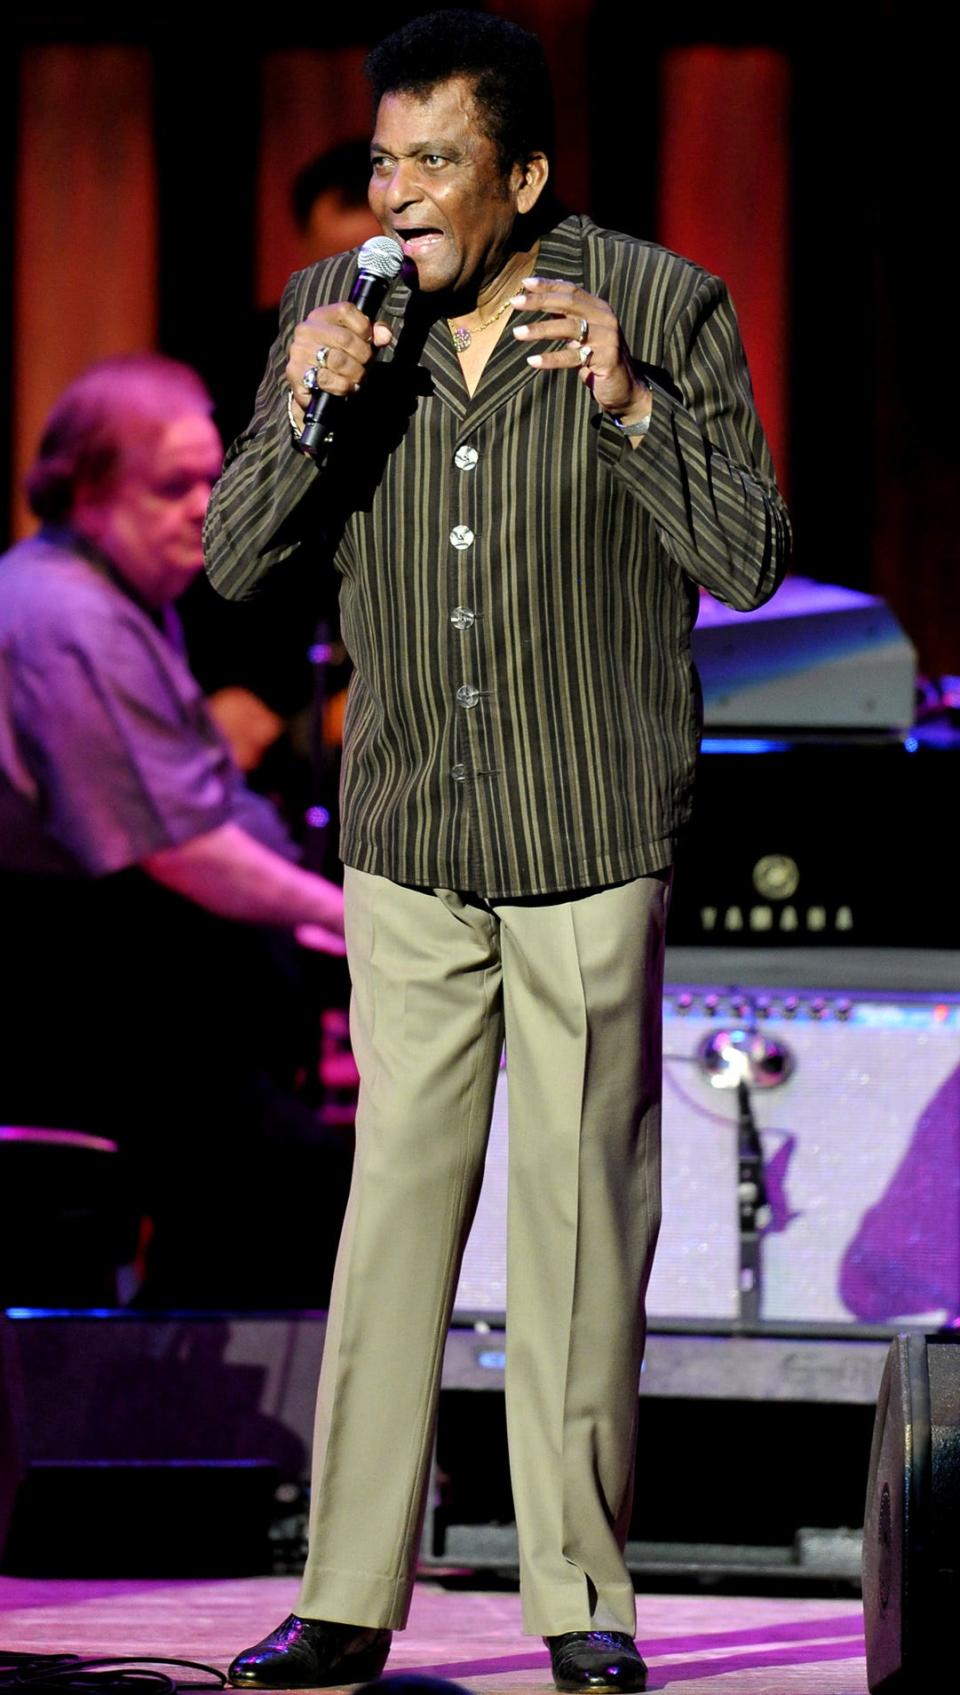 Charley Pride performs during the Grand Ole Opry show at the Ryman Auditorium on Feb. 3, 2012.